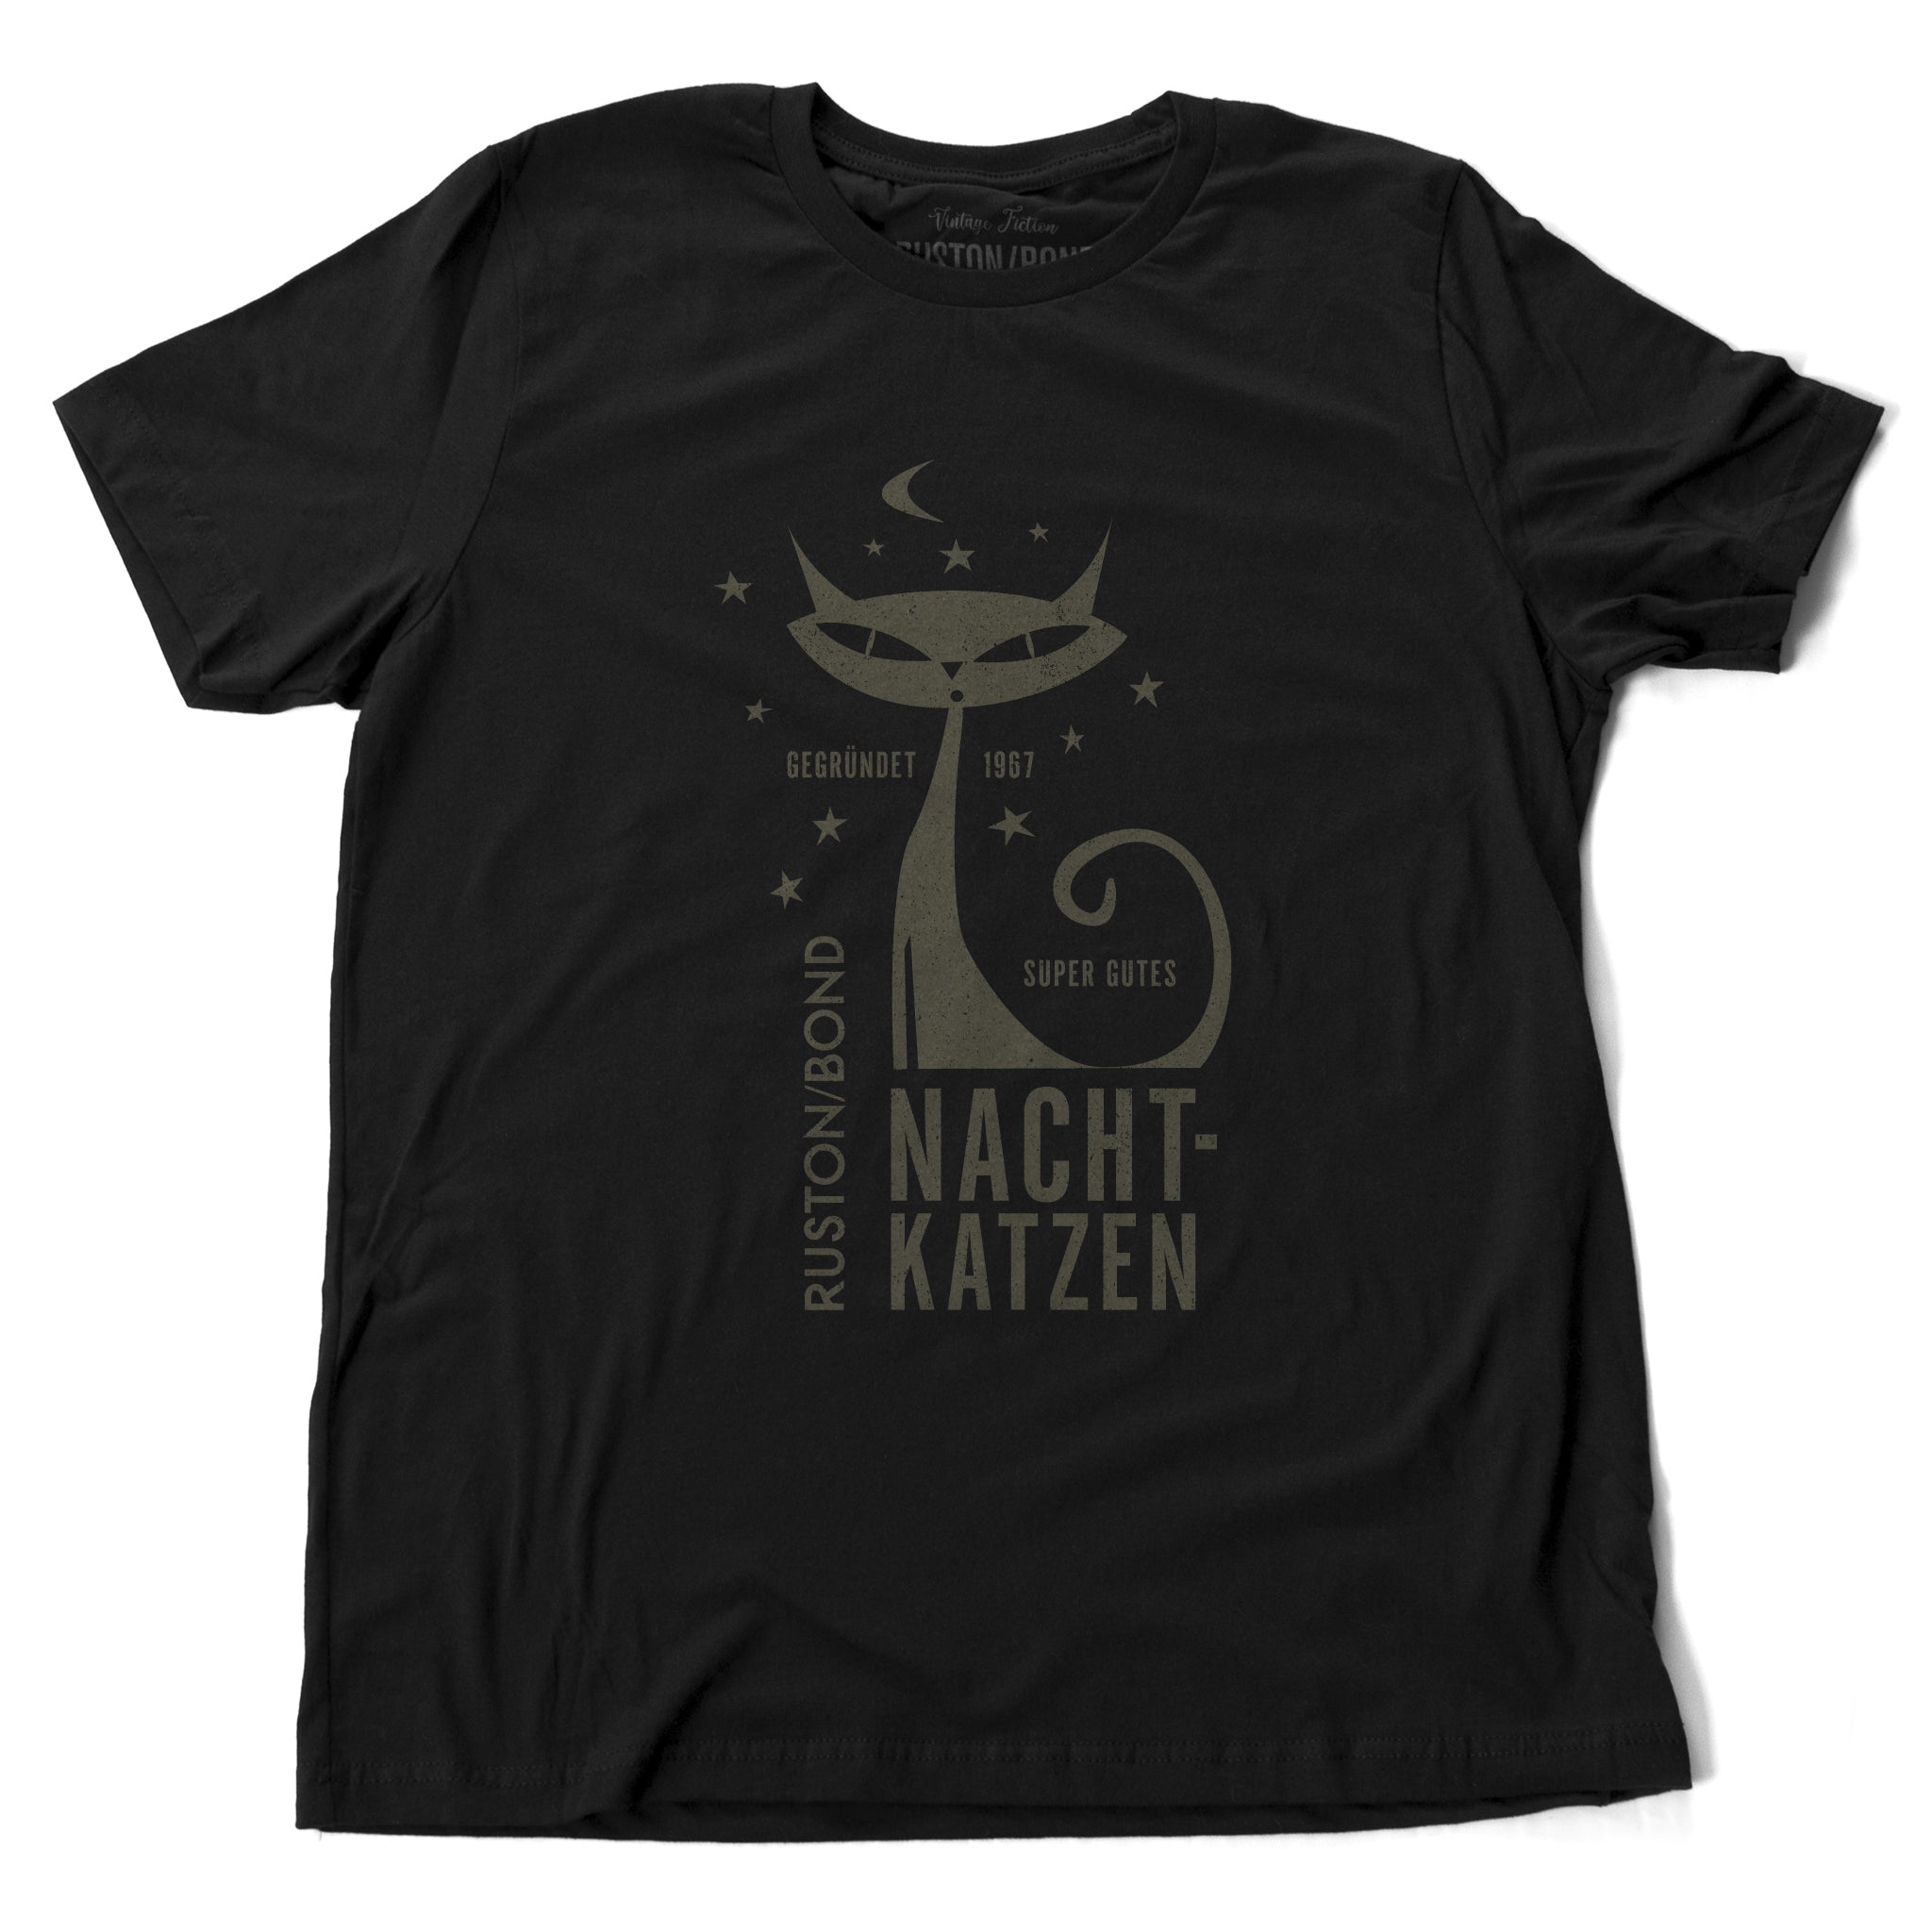 A vintage-inspired retro design t-shirt in classic Black, featuring the image of a stylized cat graphic among stars, and the German text “NACHTKATZEN, Super Gutes” — translating to “Night Cats, super good” and the year 1967, with the Ruston/Bond logo beneath. From wolfsaint.net